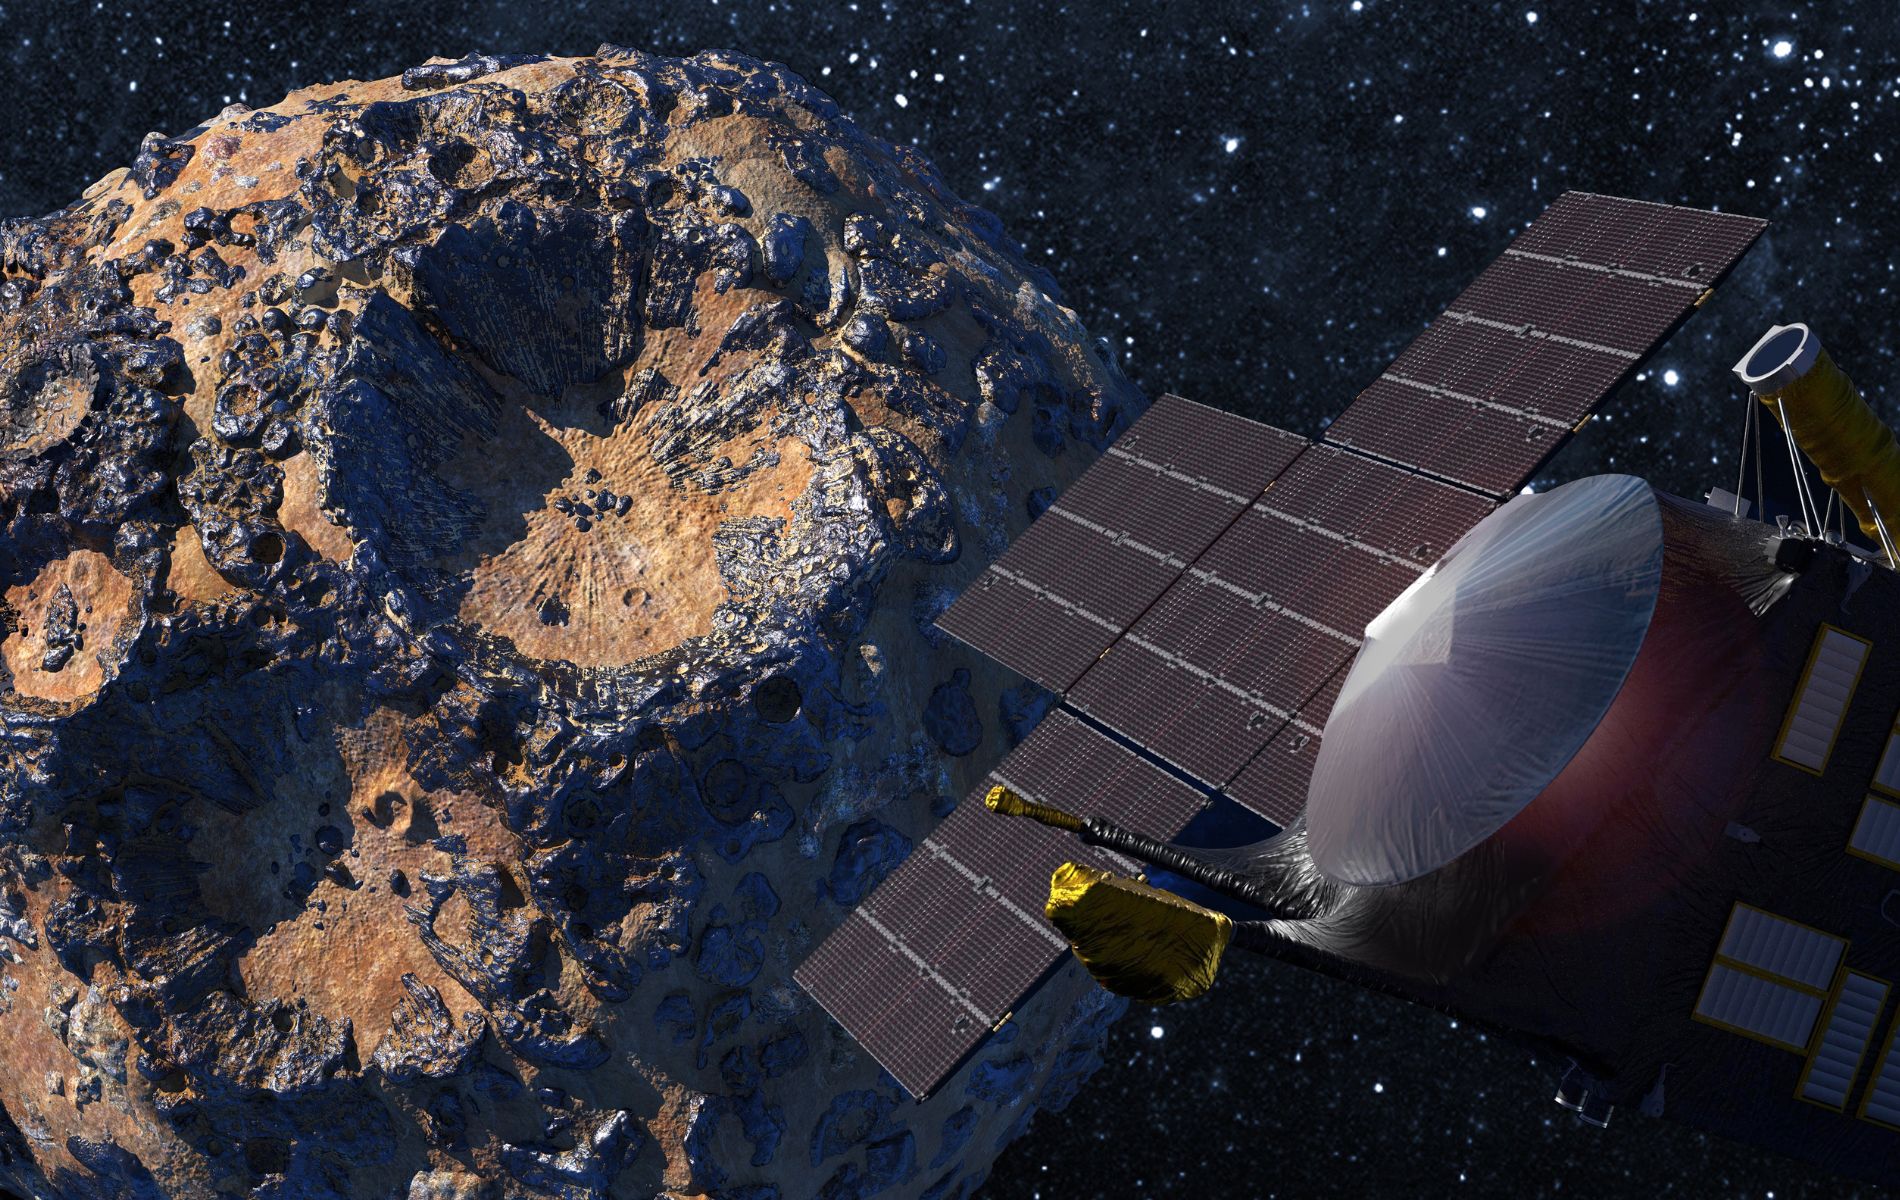 Another week, and then NASA will determine its path to a mysterious metallic object in space